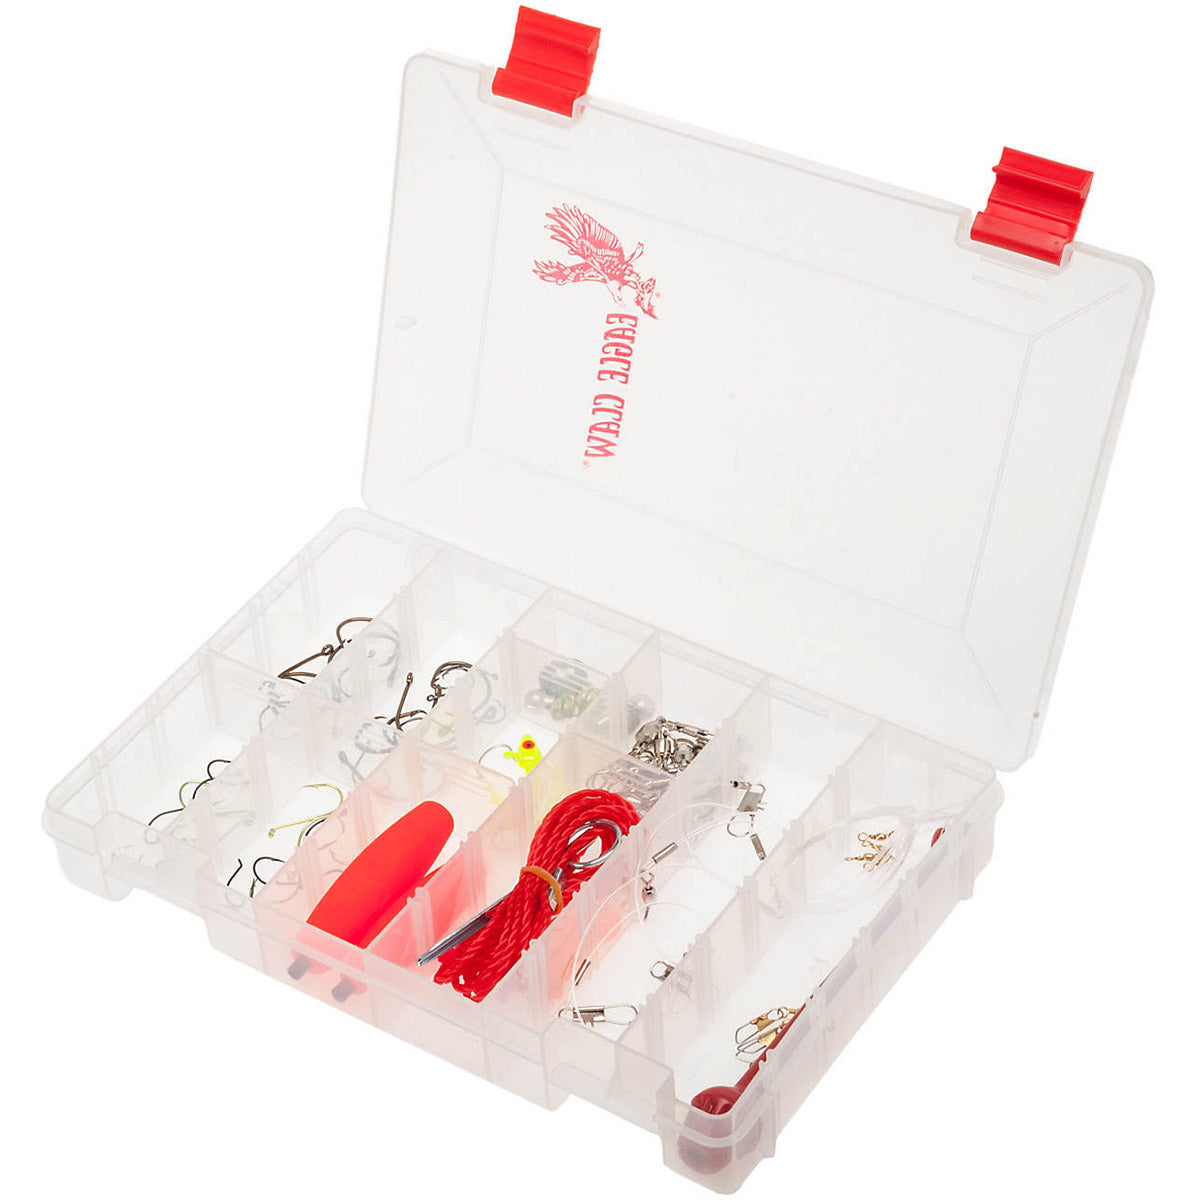 Eagle Claw Saltwater Tackle Kit, 75 Piece – Forza Sports